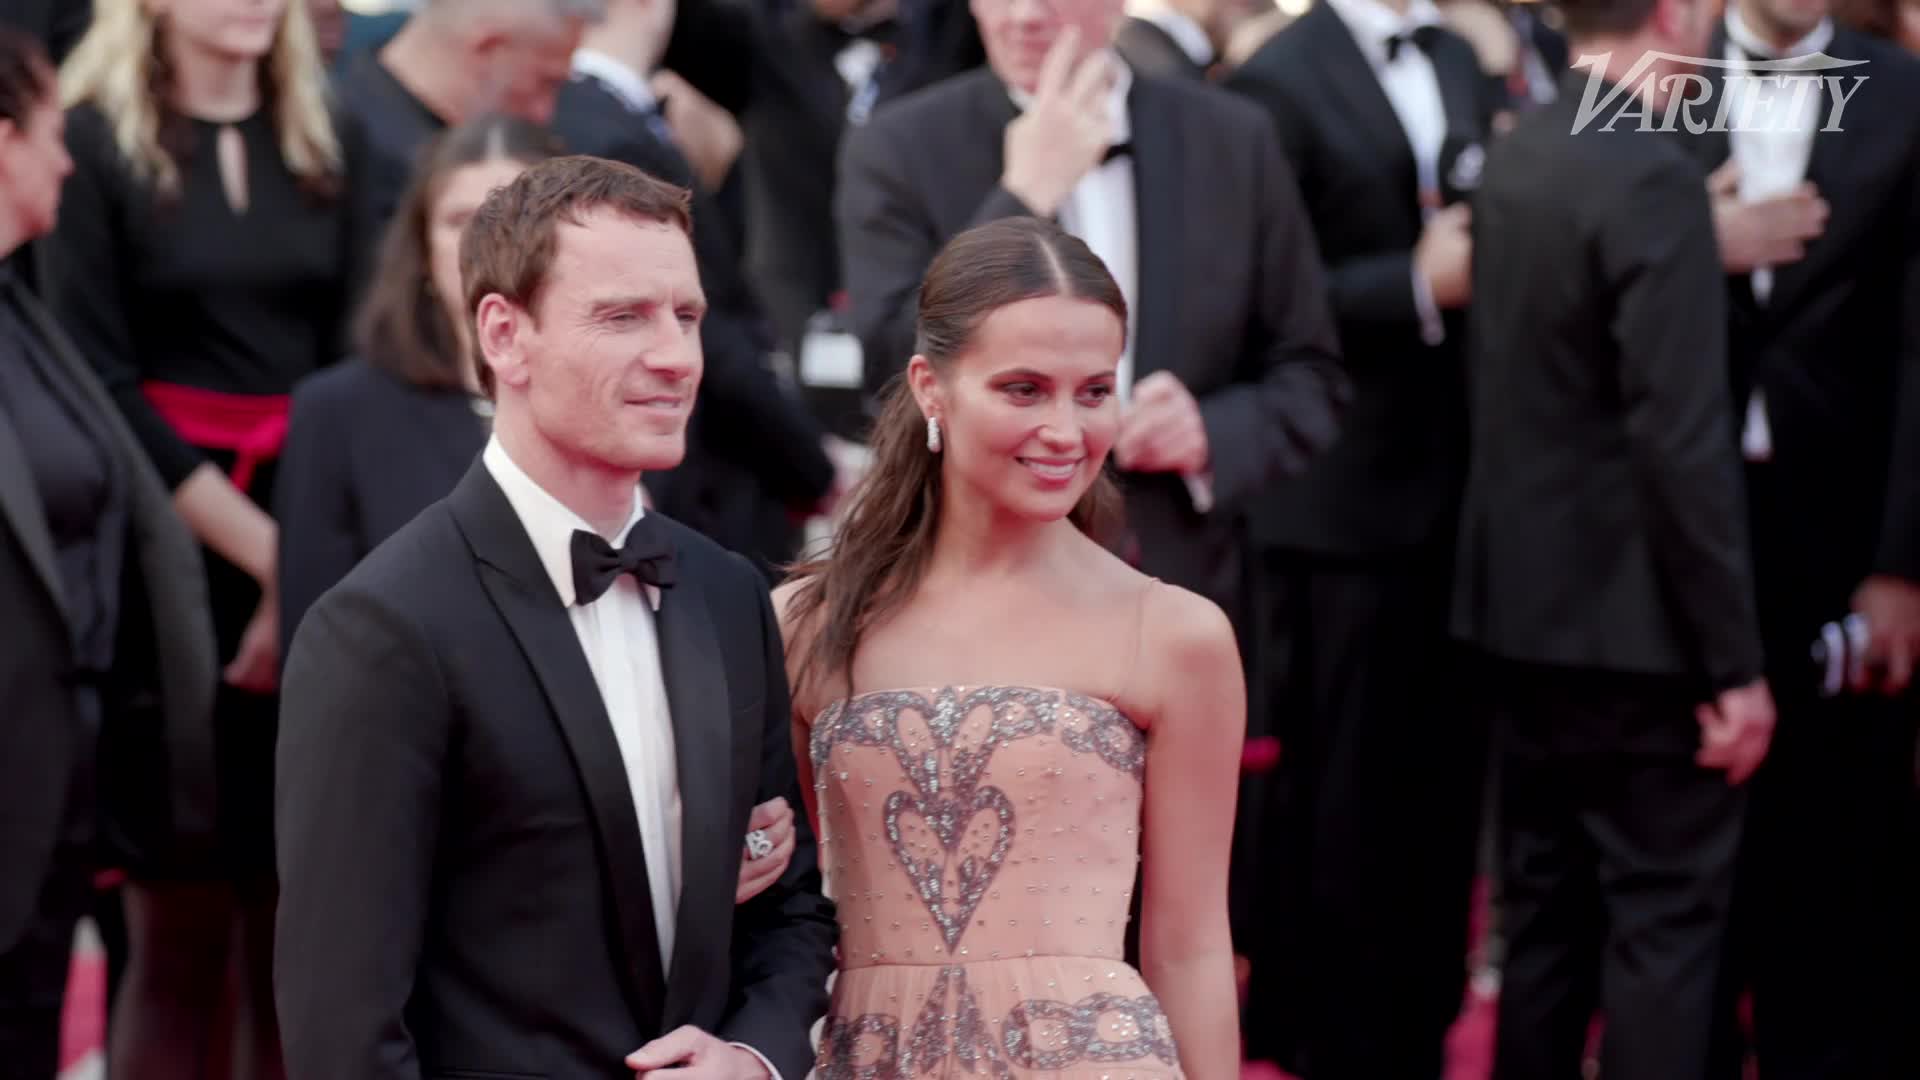 Michael Fassbender & Alicia Vikander Make Rare Appearance Together, First  Red Carpet in Two Years!: Photo 4761742, 2022 Cannes Film Festival, Alicia  Vikander, Michael Fassbender Photos